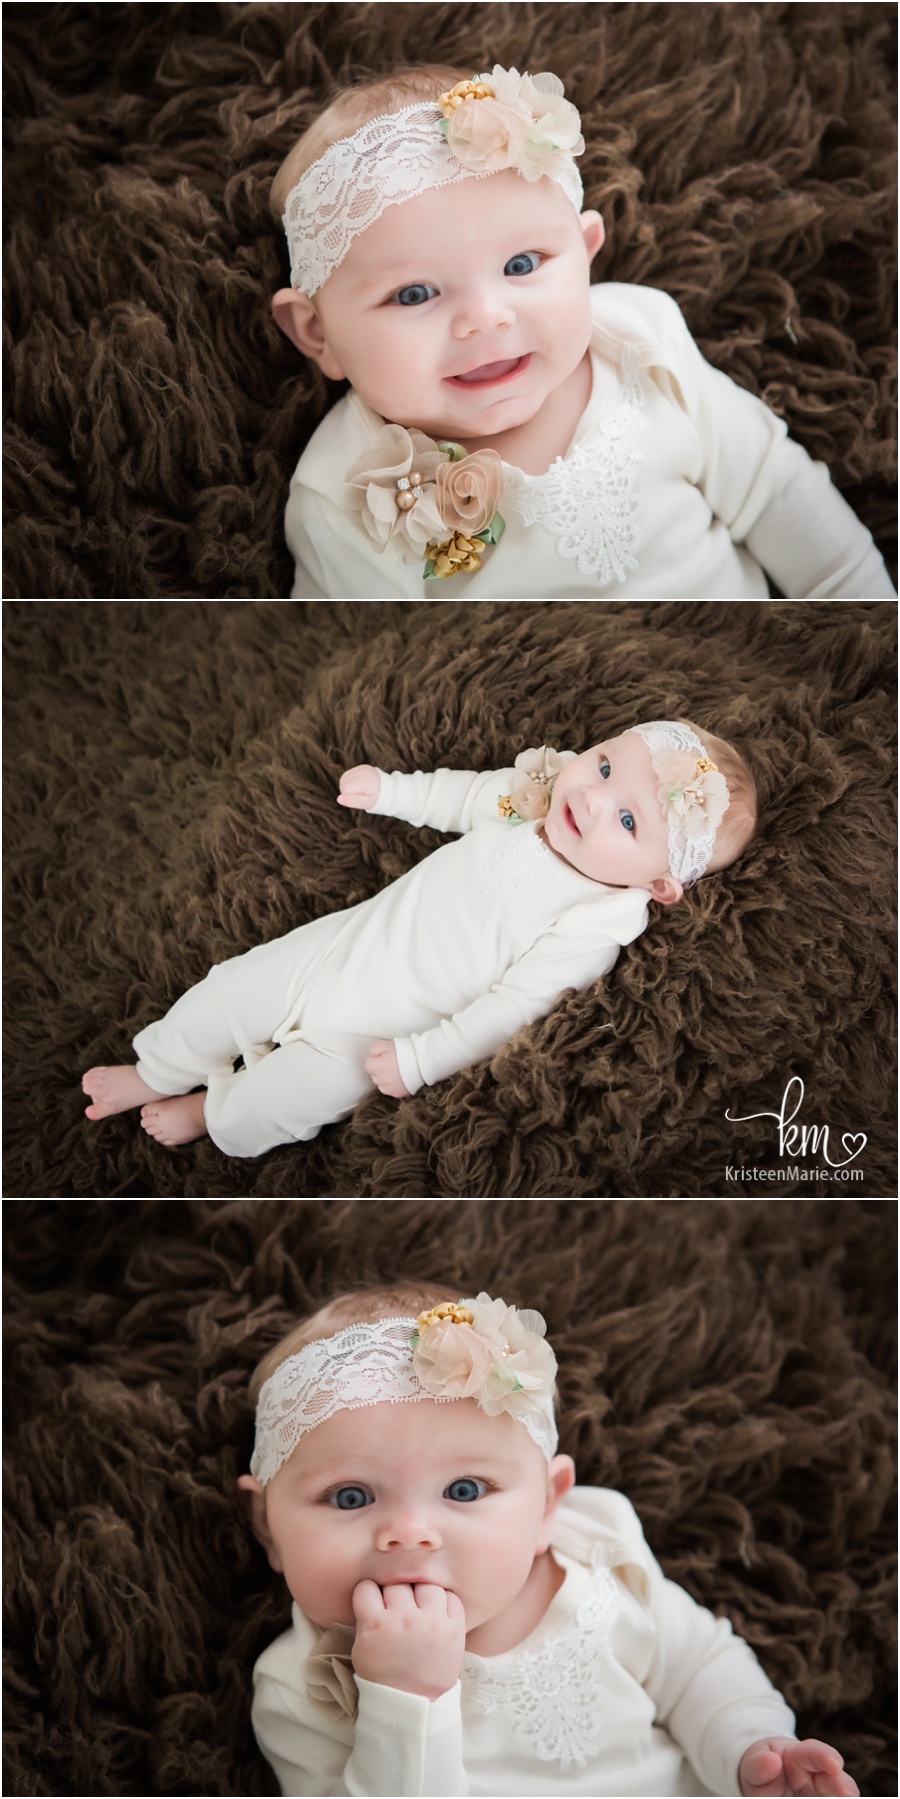 4 month old girl in cream, peach and brown - neutral colors